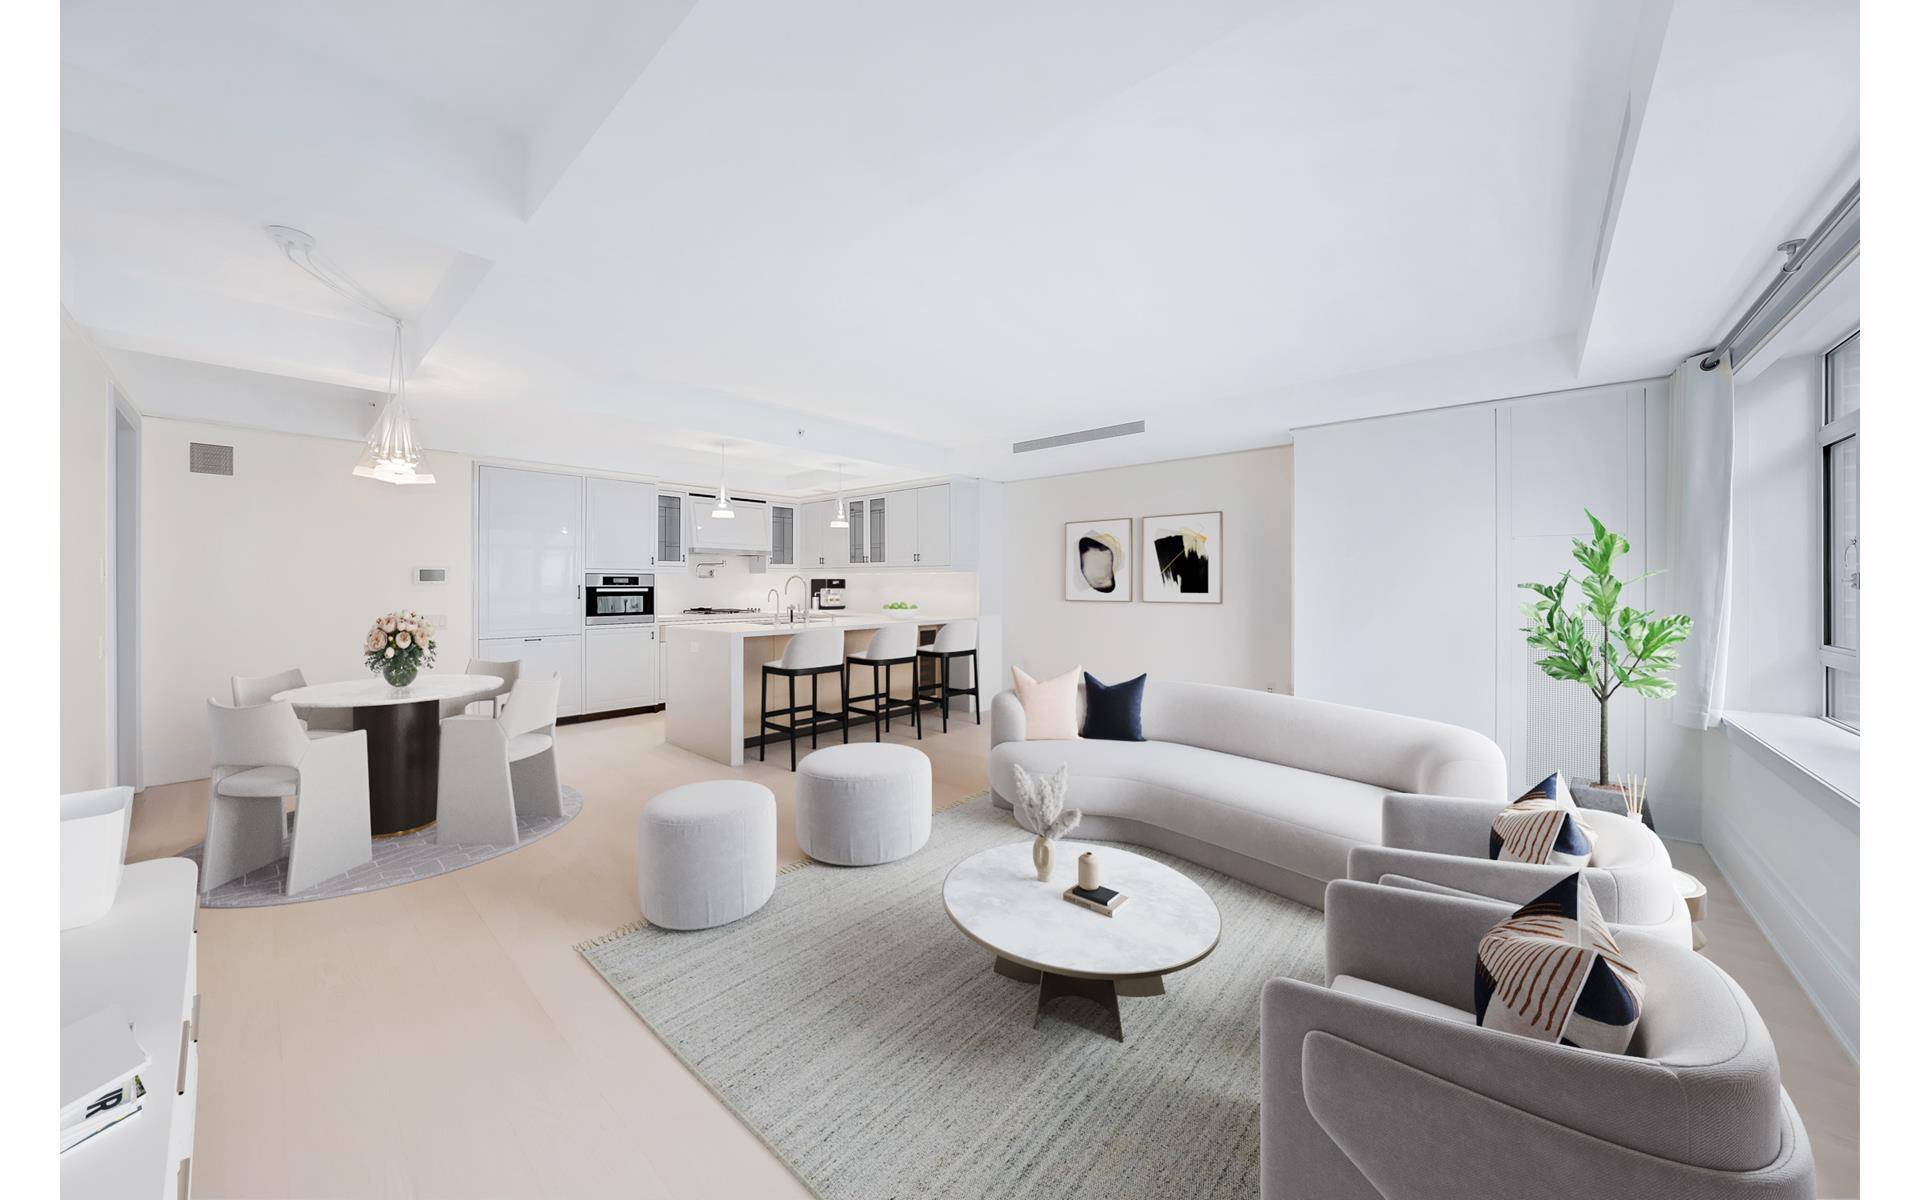 Extraordinary Rental, available immediately, in the most coveted neighborhood on the Upper East Side, close to great shopping, restaurants and Central Park.